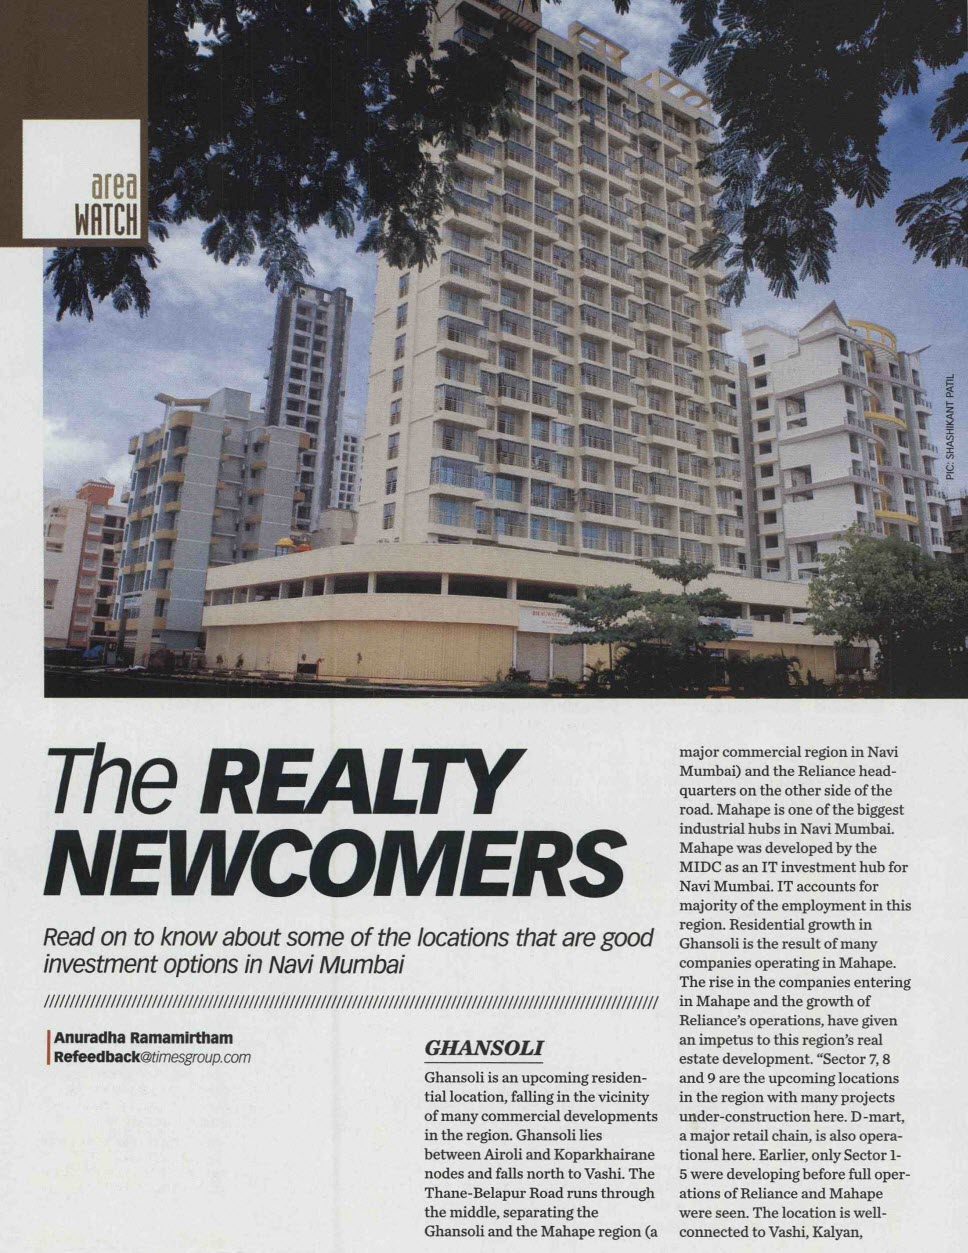 The Realty Newcomers